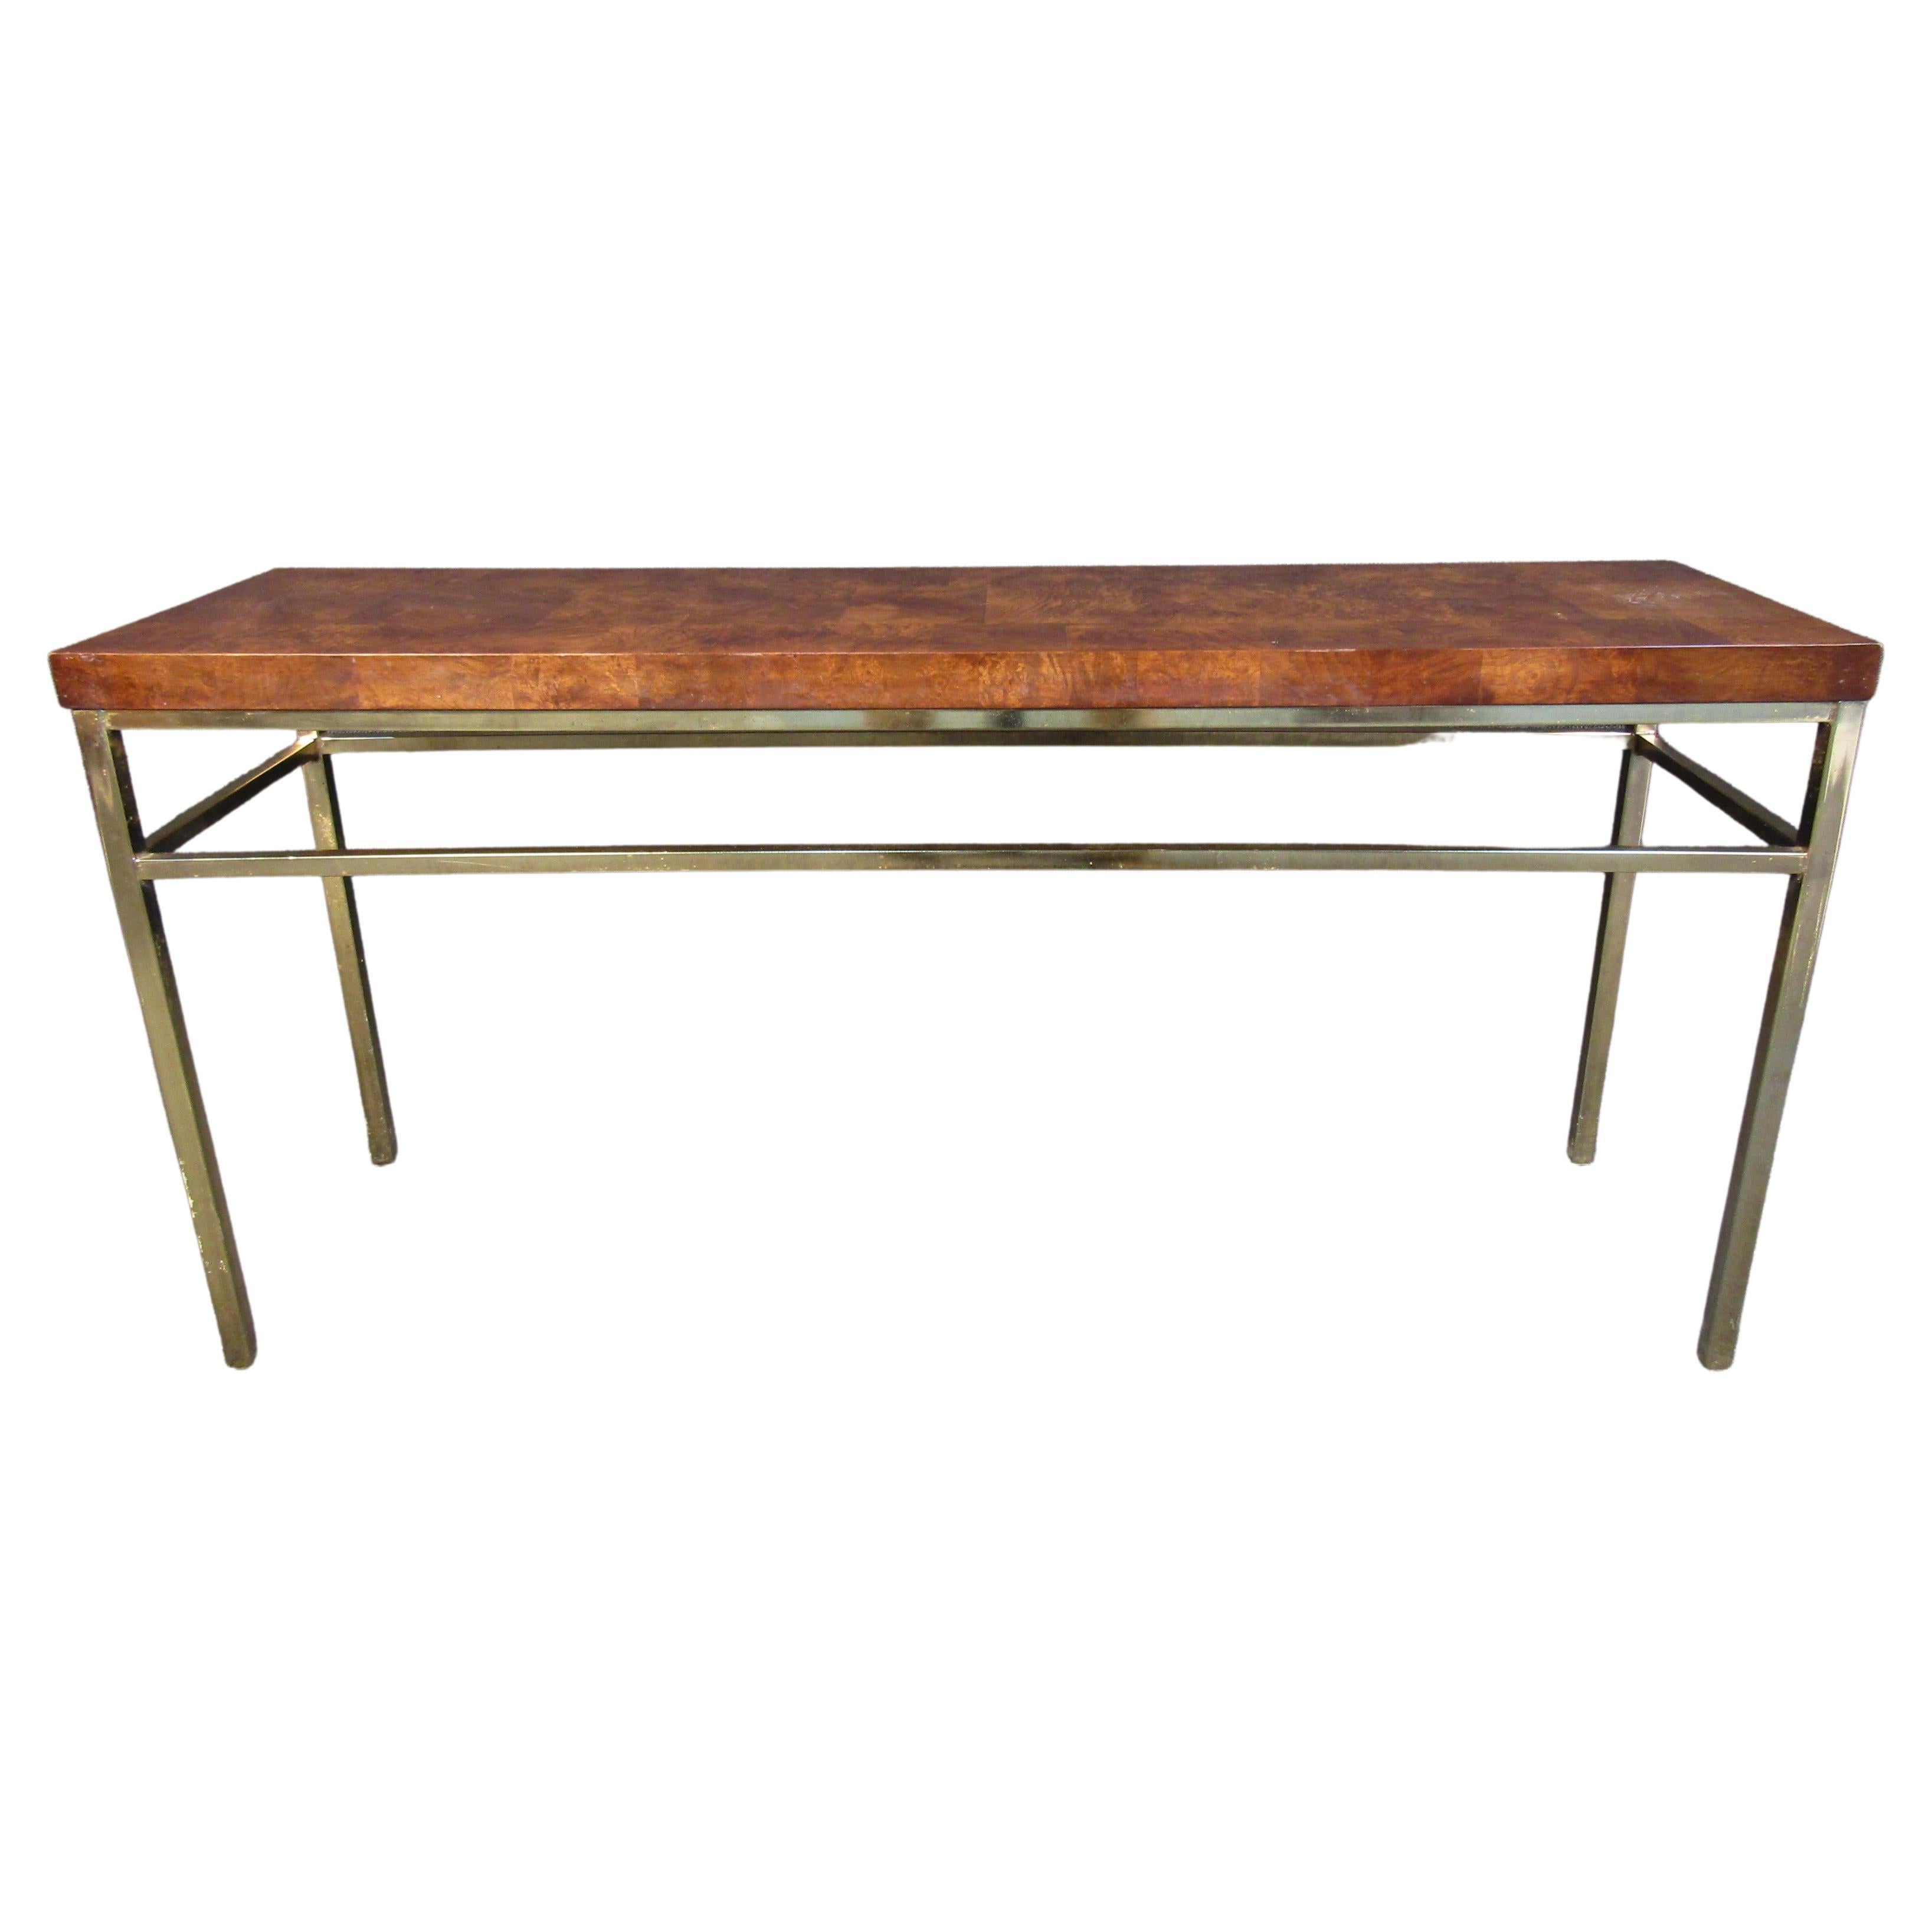 Burl Wood and Metal Console Table